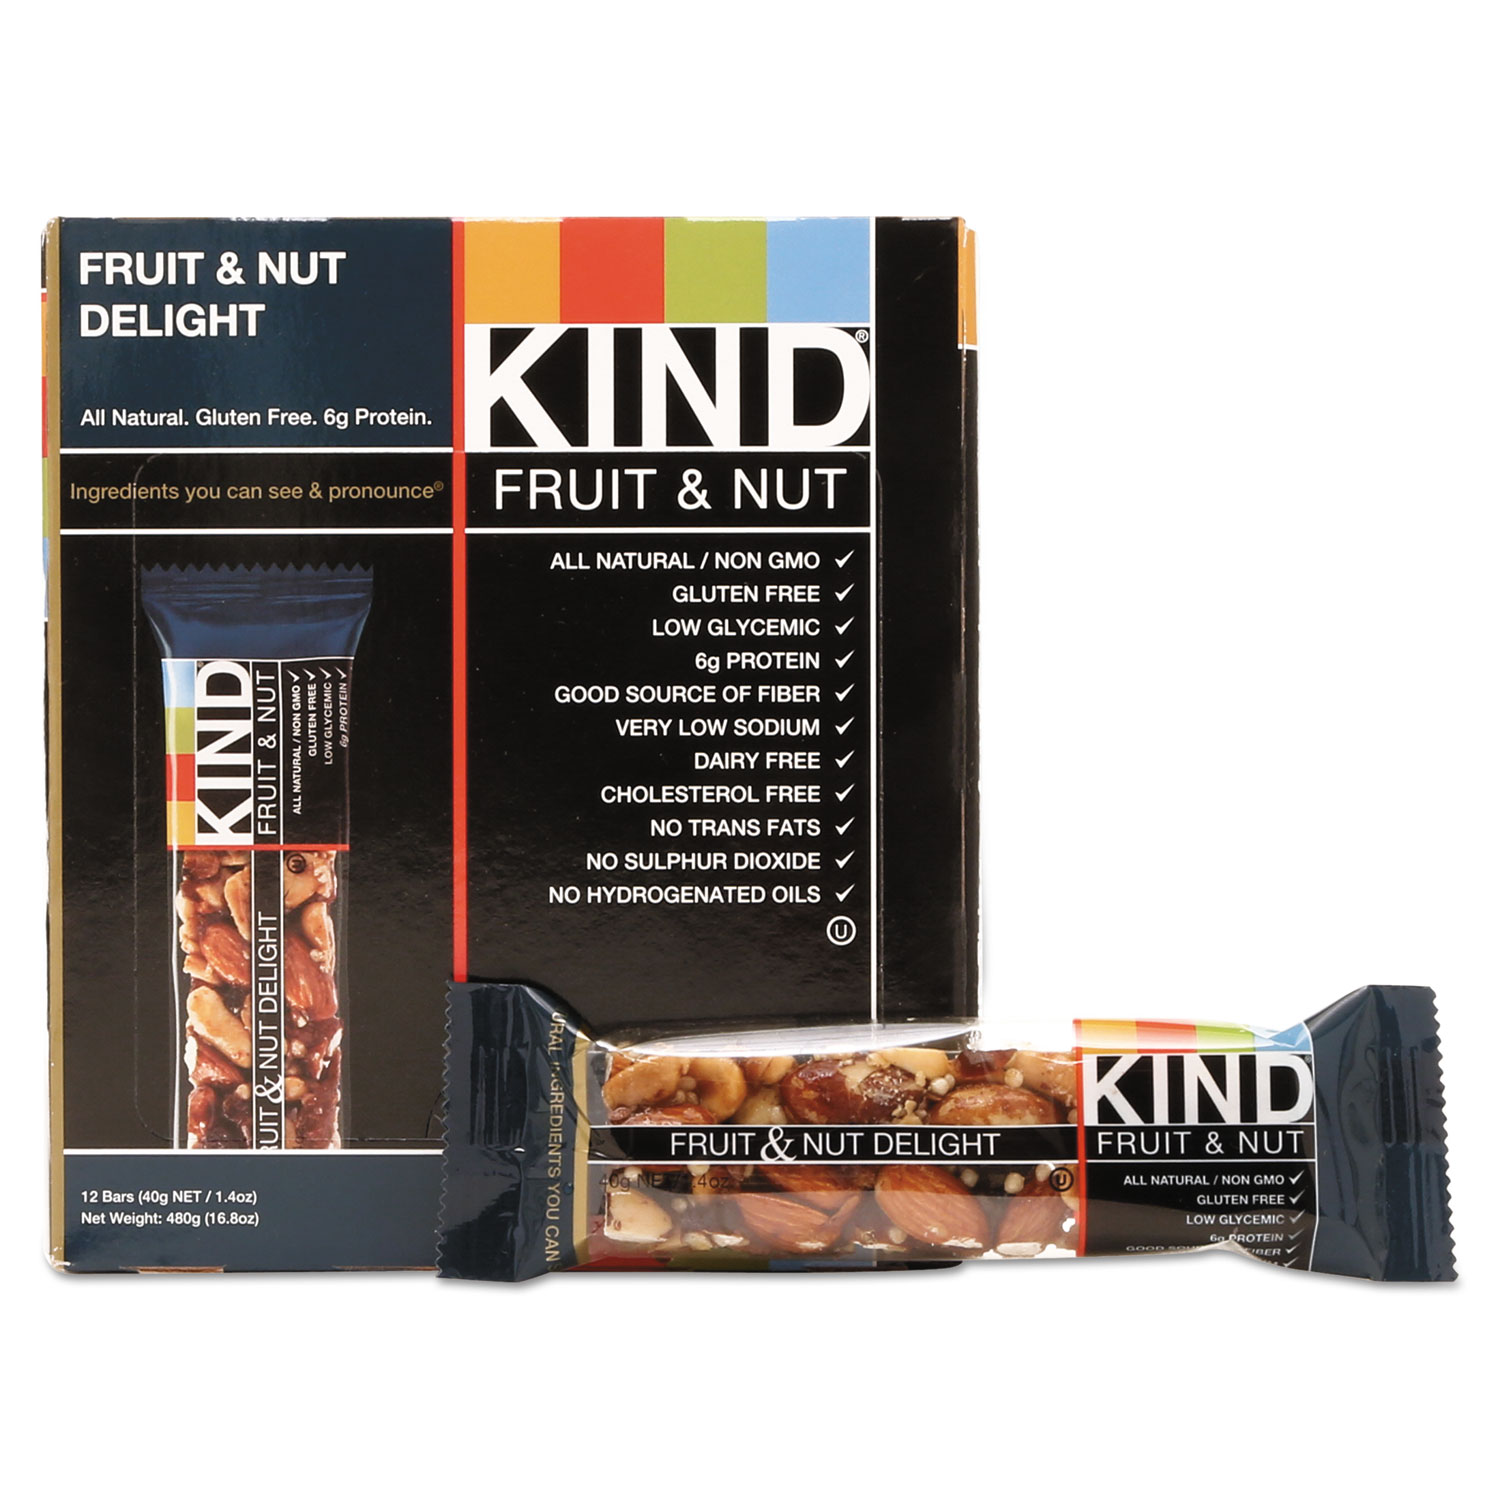  KIND 17824 Fruit and Nut Bars, Fruit and Nut Delight, 1.4 oz, 12/Box (KND17824) 